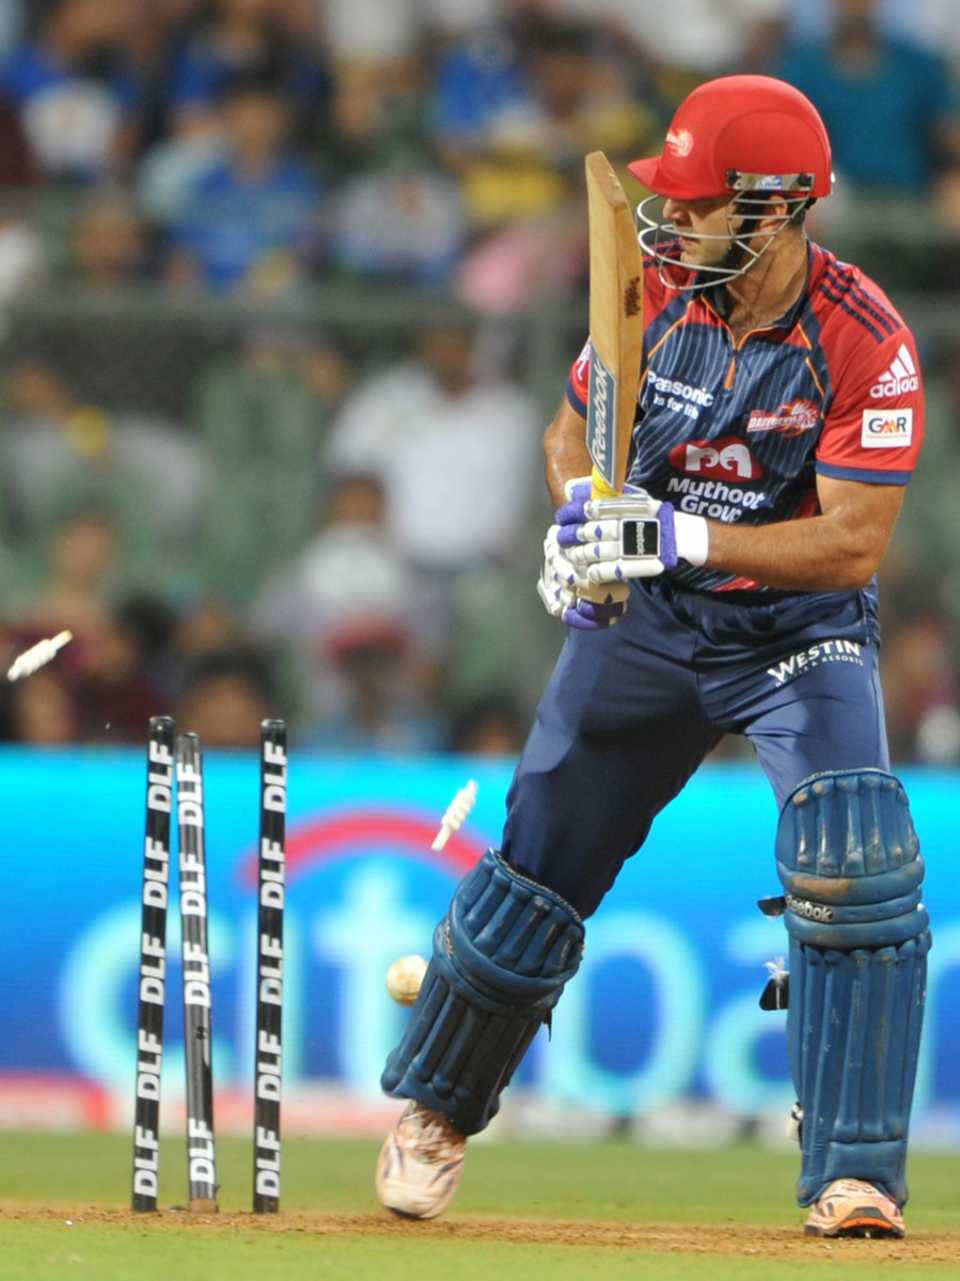 Irfan Pathan's stumps get in the way of a Lasith Malinga yorker